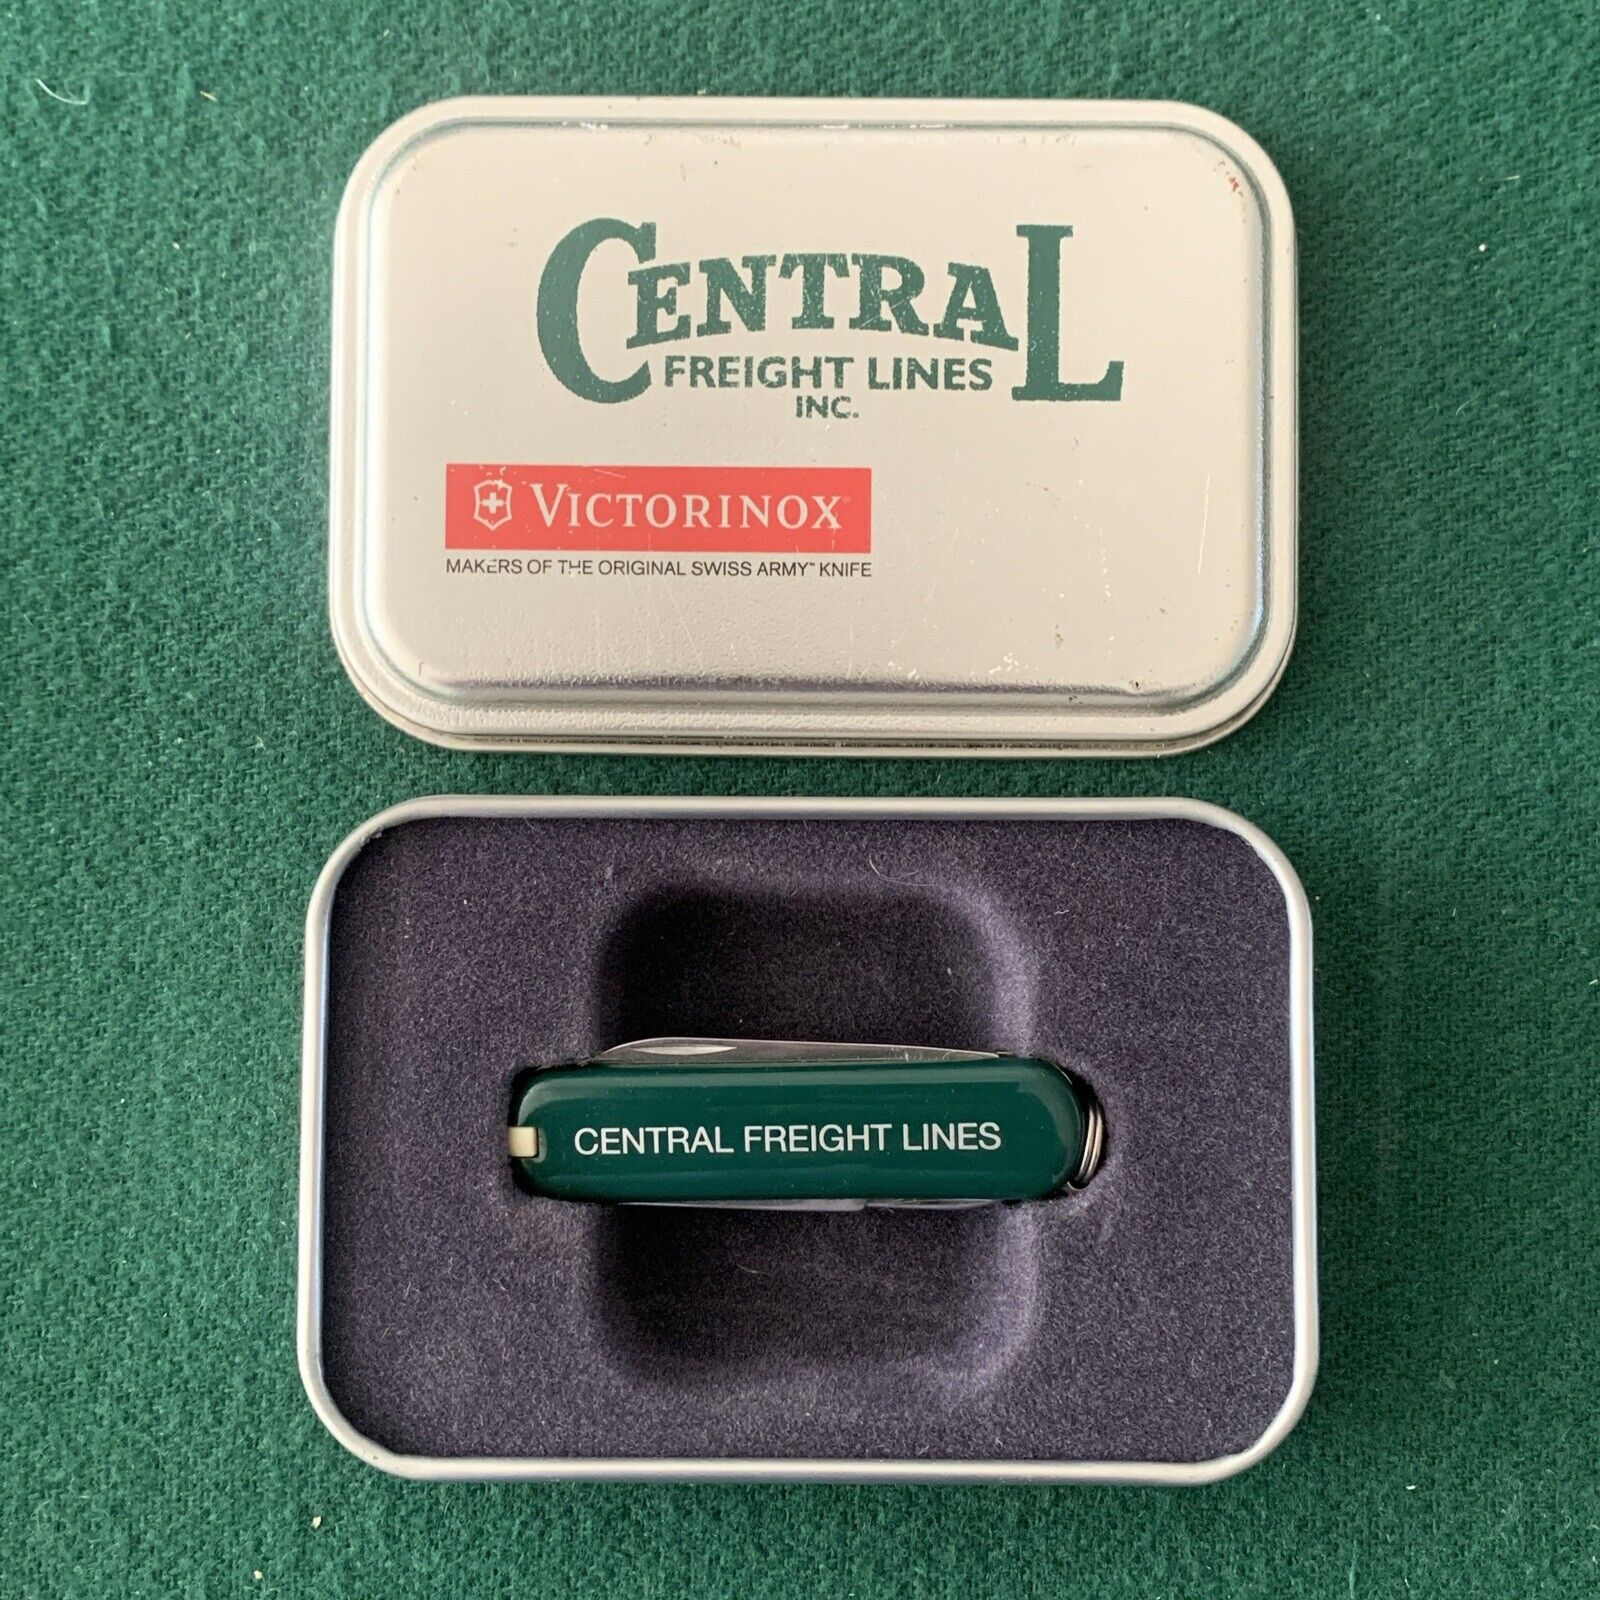 Victorinox CENTRAL FREIGHT LINES Railroad Swiss Army Pocket Knife w/ Tin